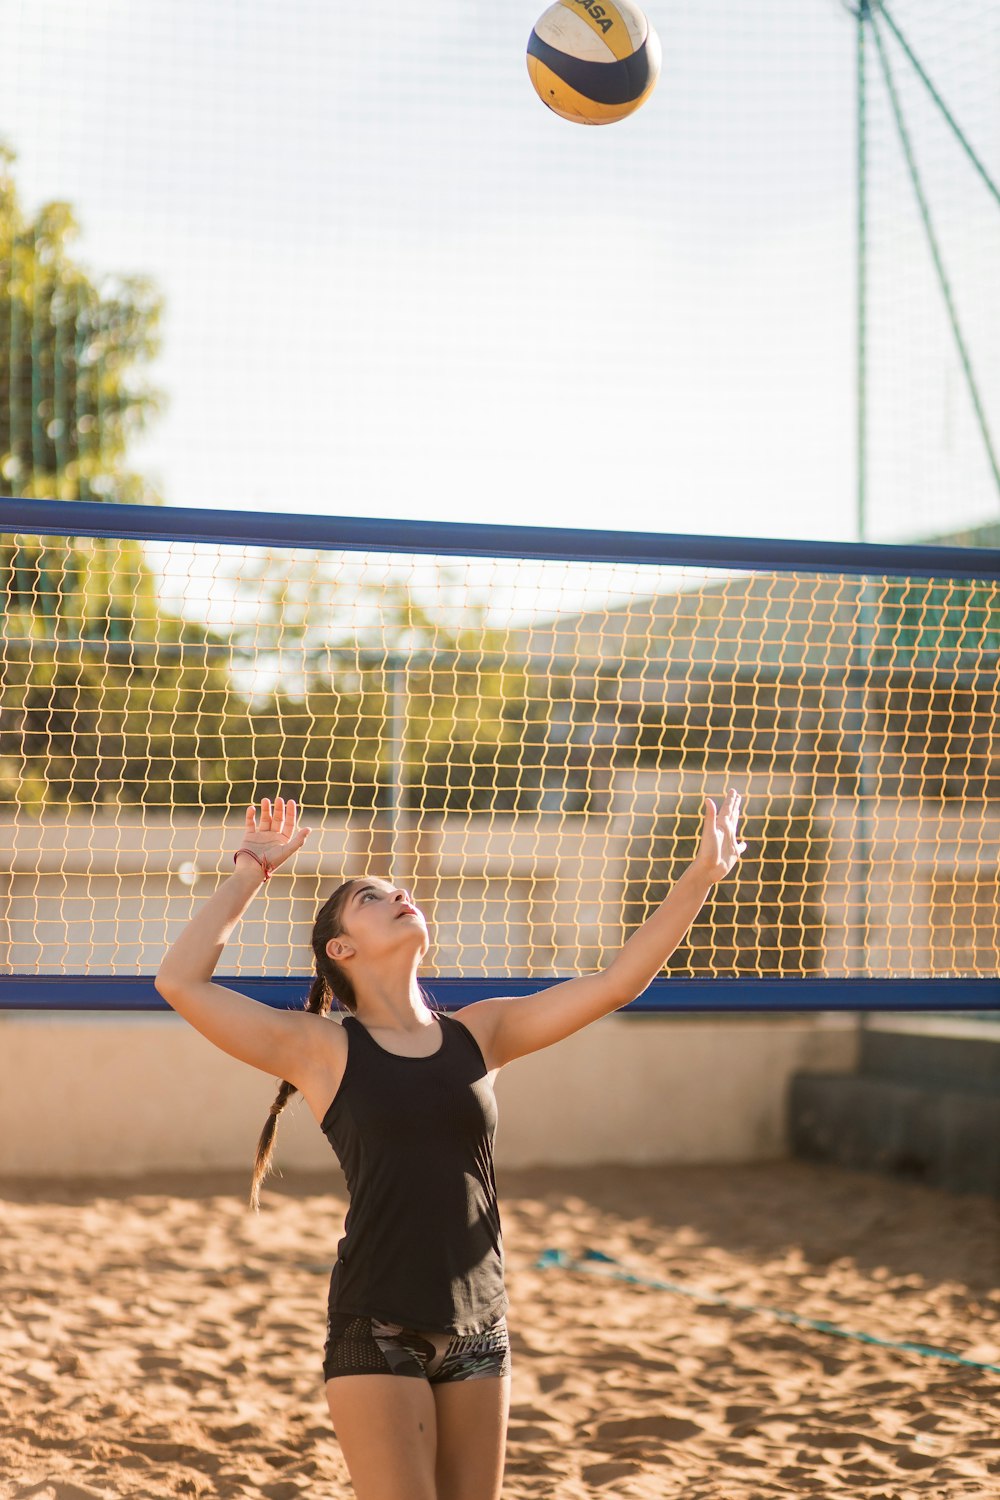 a woman reaching up to hit a volleyball